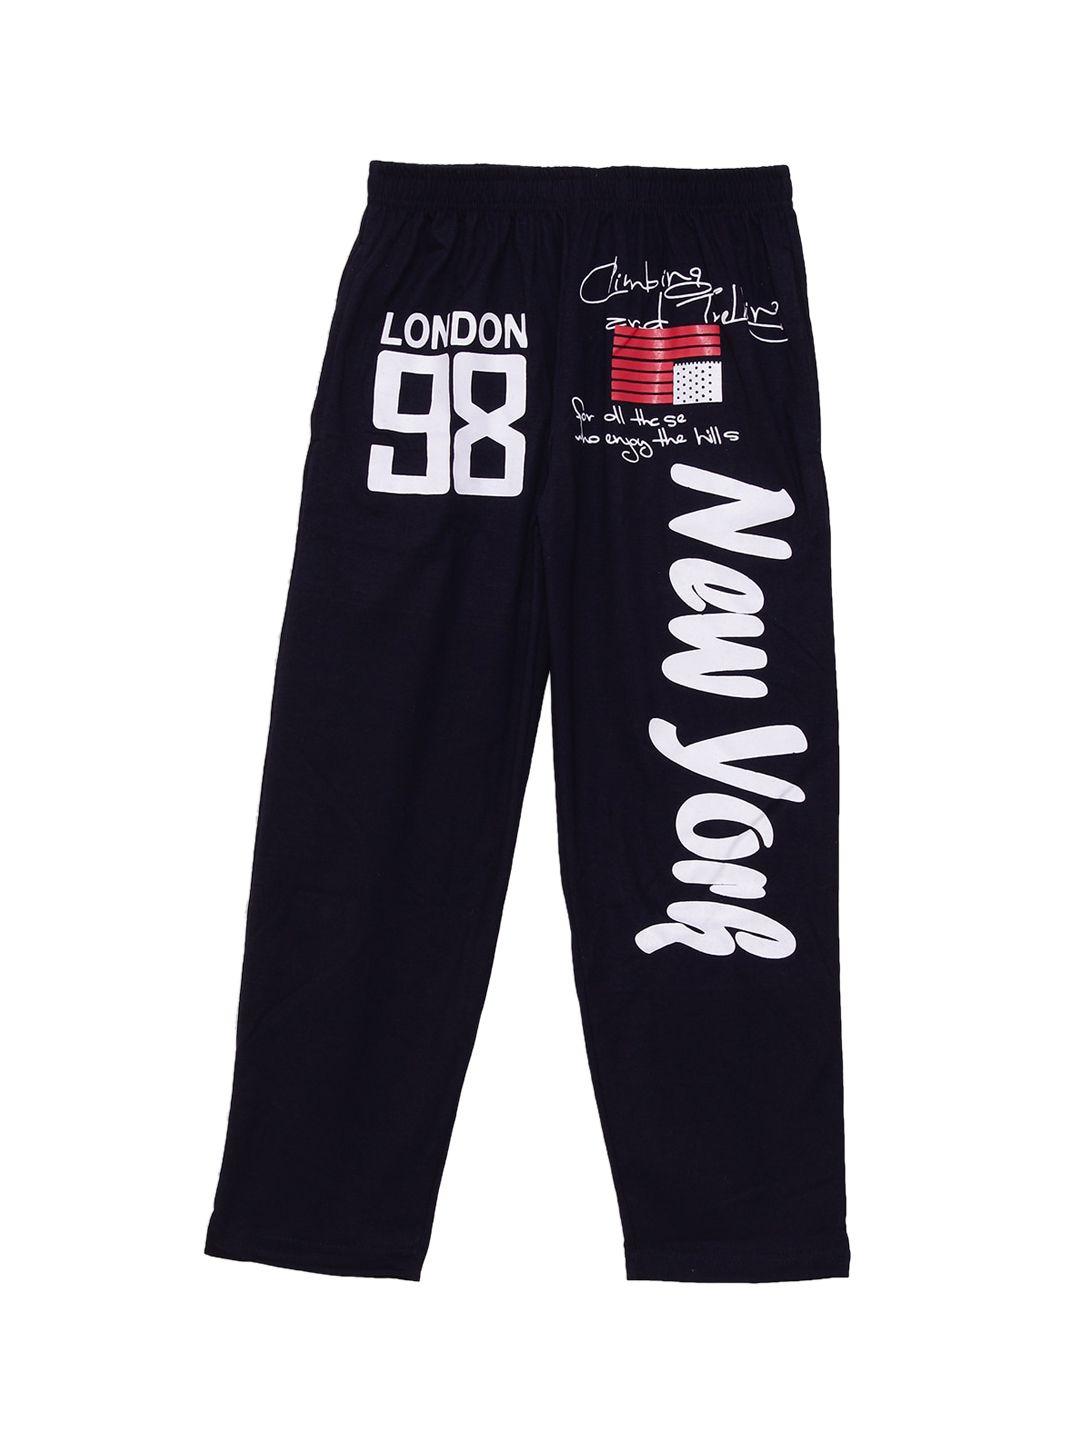 fashionable boys navy blue printed pure cotton track pants